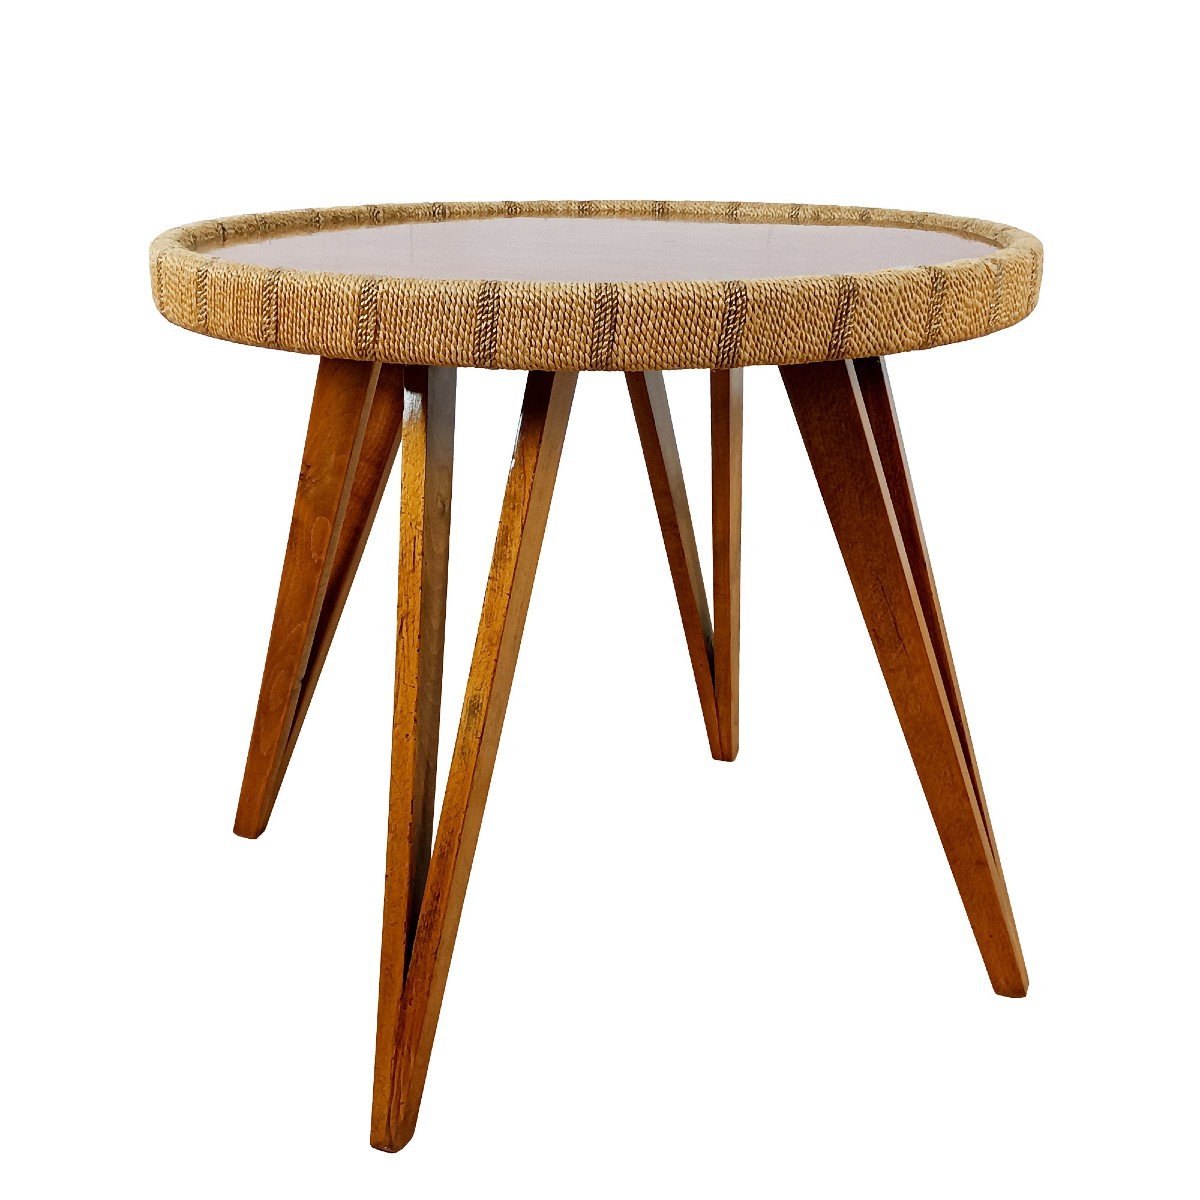 Side Table With Four Double Legs And Top In Solid Beech By Augusto Romano - Italy 1950